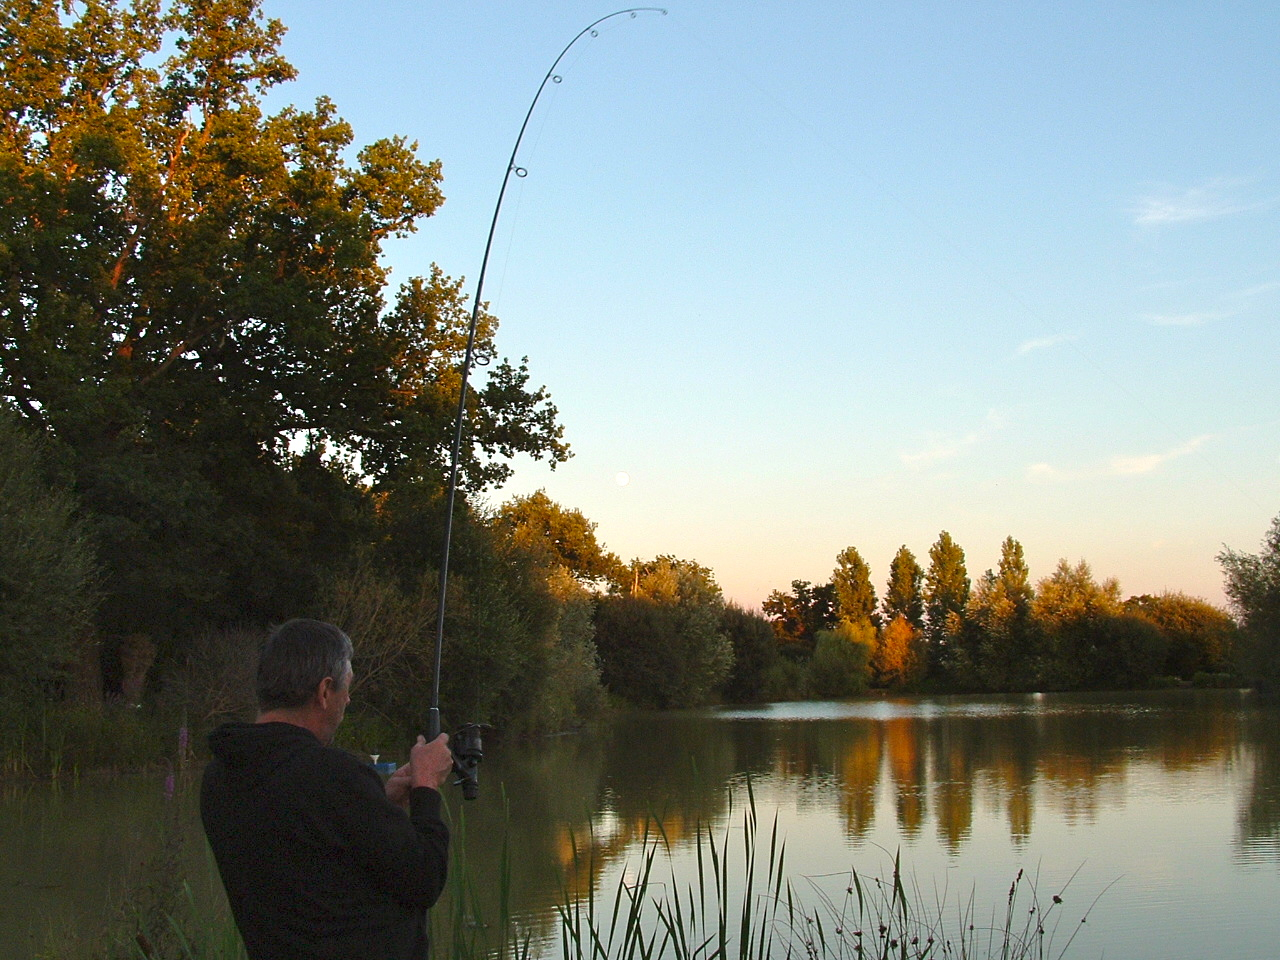 Carp fishing in France with accommodation at Oakview Lake. What a view!